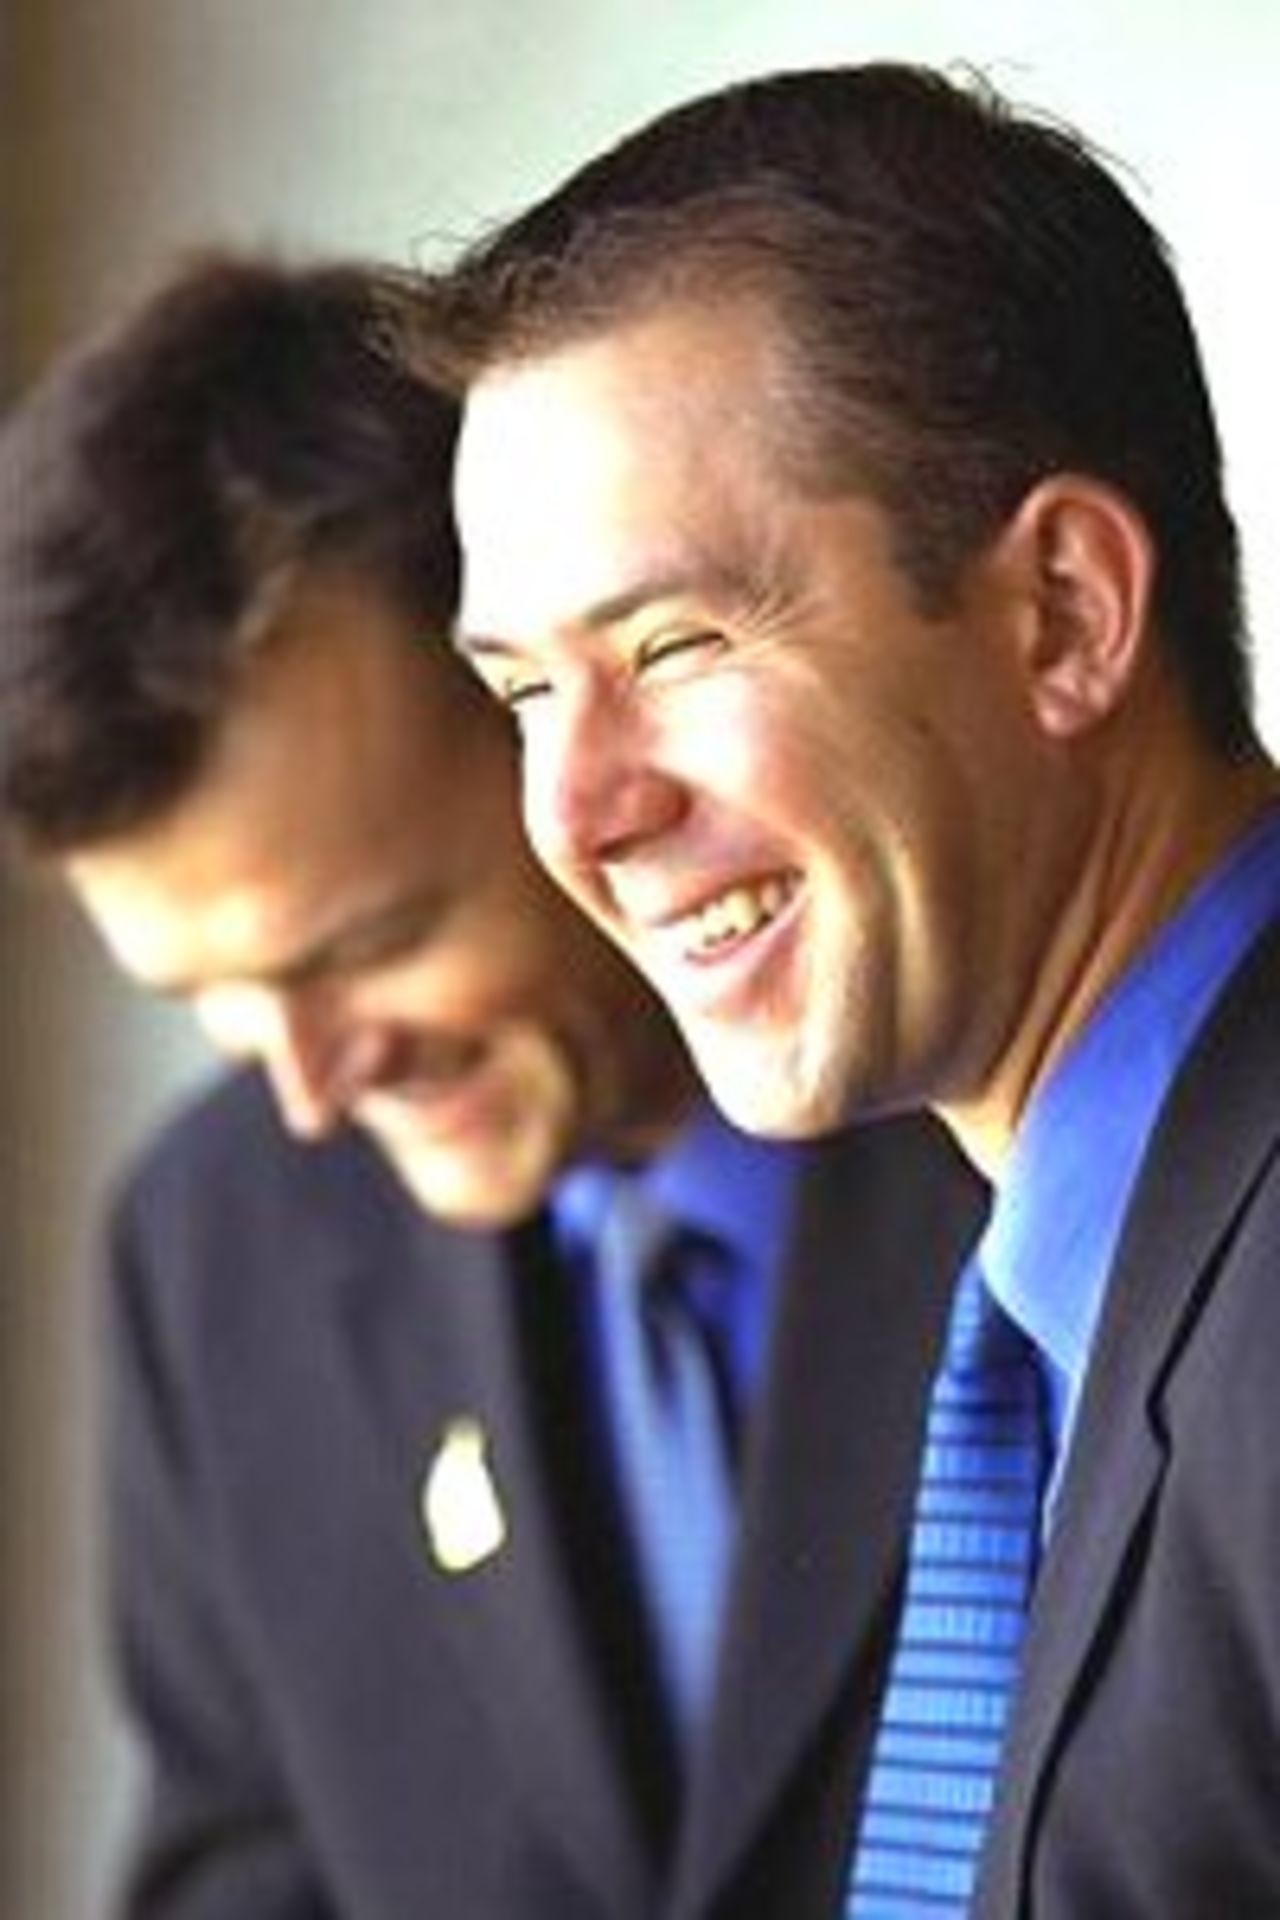 Adam Gilchrist and Ricky Ponting of Australia share a joke after an ACB Press Conference in which Gilchrist was announced as Australian captain and Ponting vice-captain, held at Melbourne Airport in Melbourne, Australia.